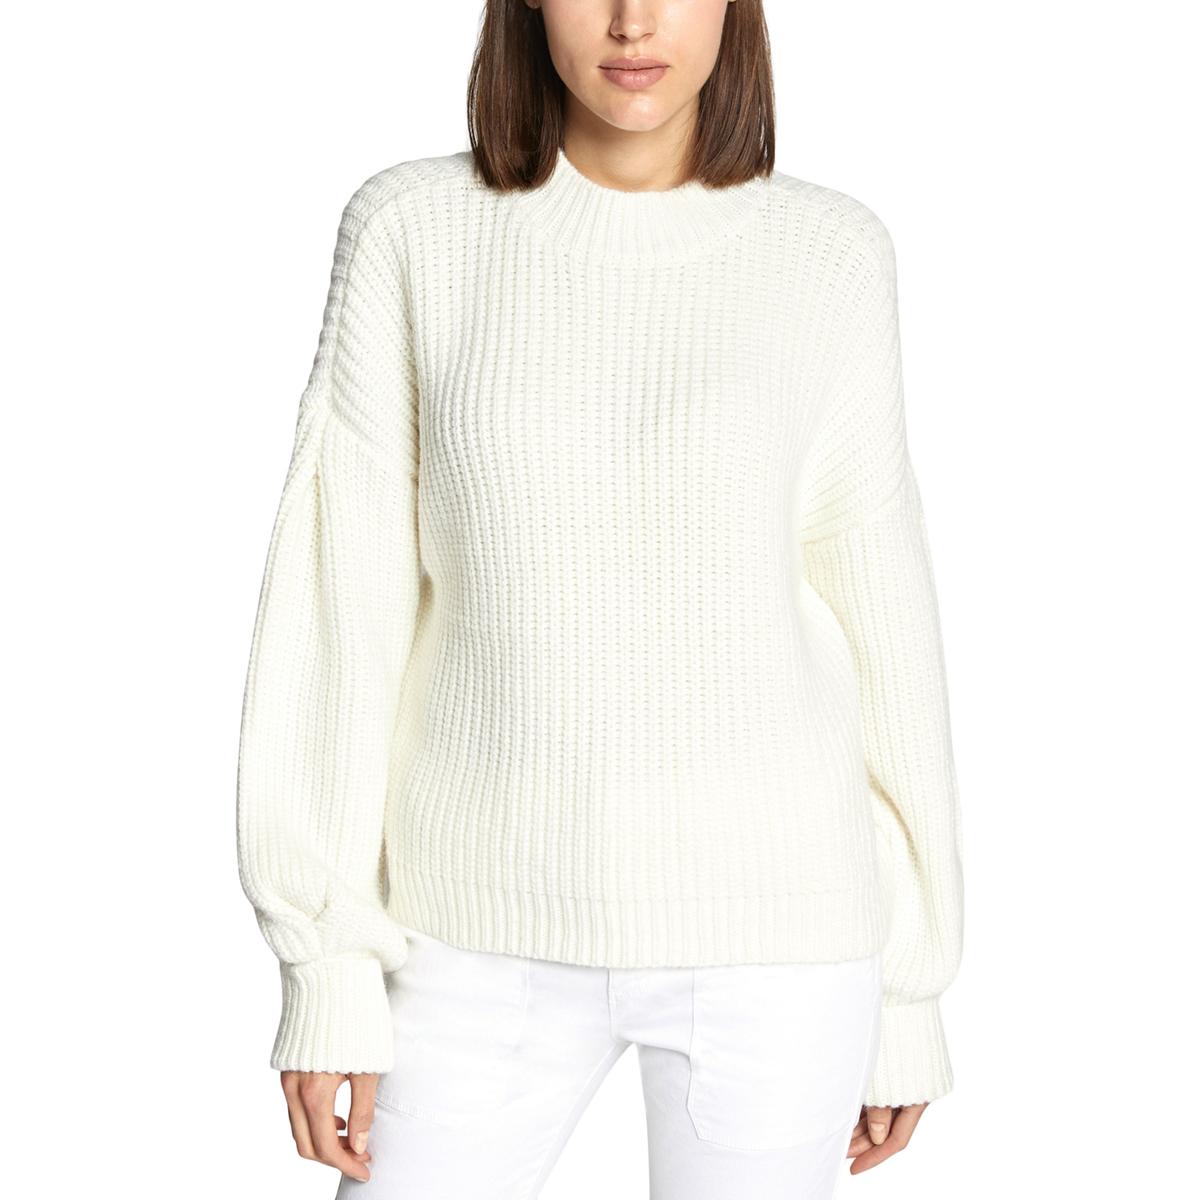 Sanctuary Womens White Mock-Neck Waffle-Knit Top Pullover Sweater S ...